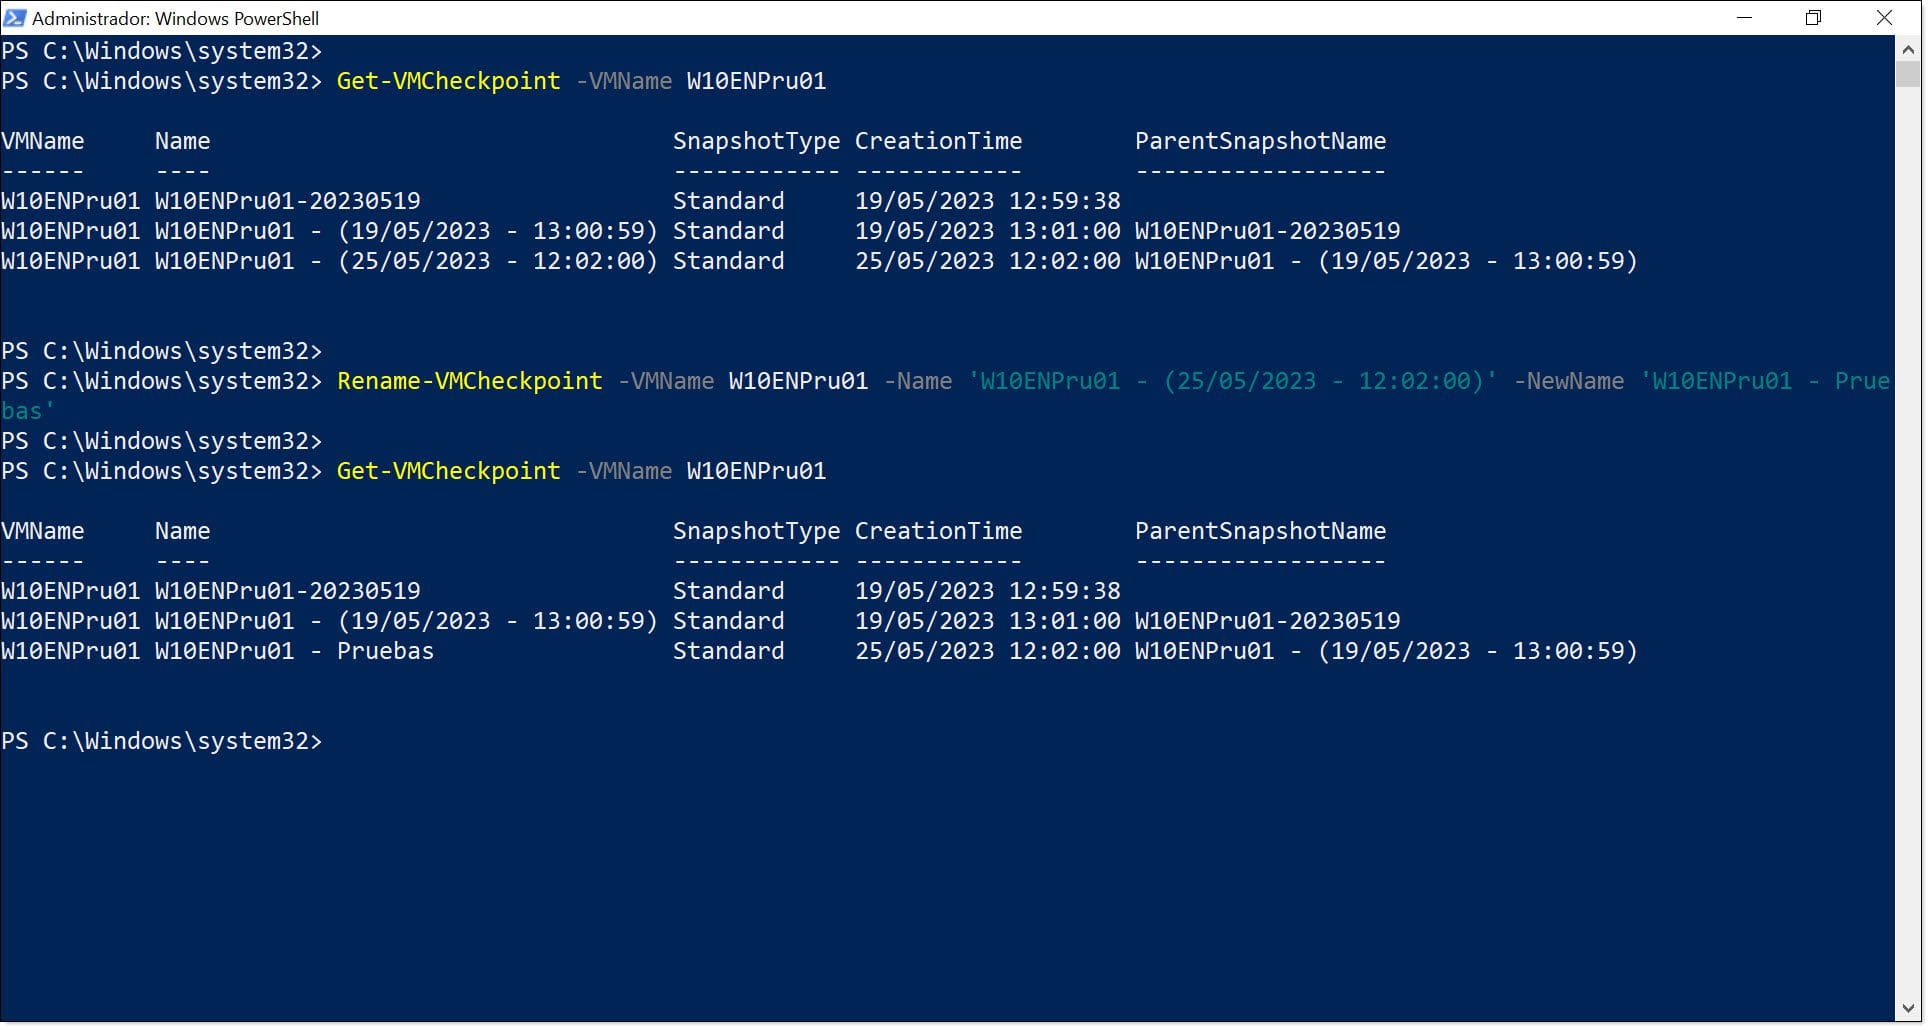 Image - Renaming a checkpoint using PowerShell